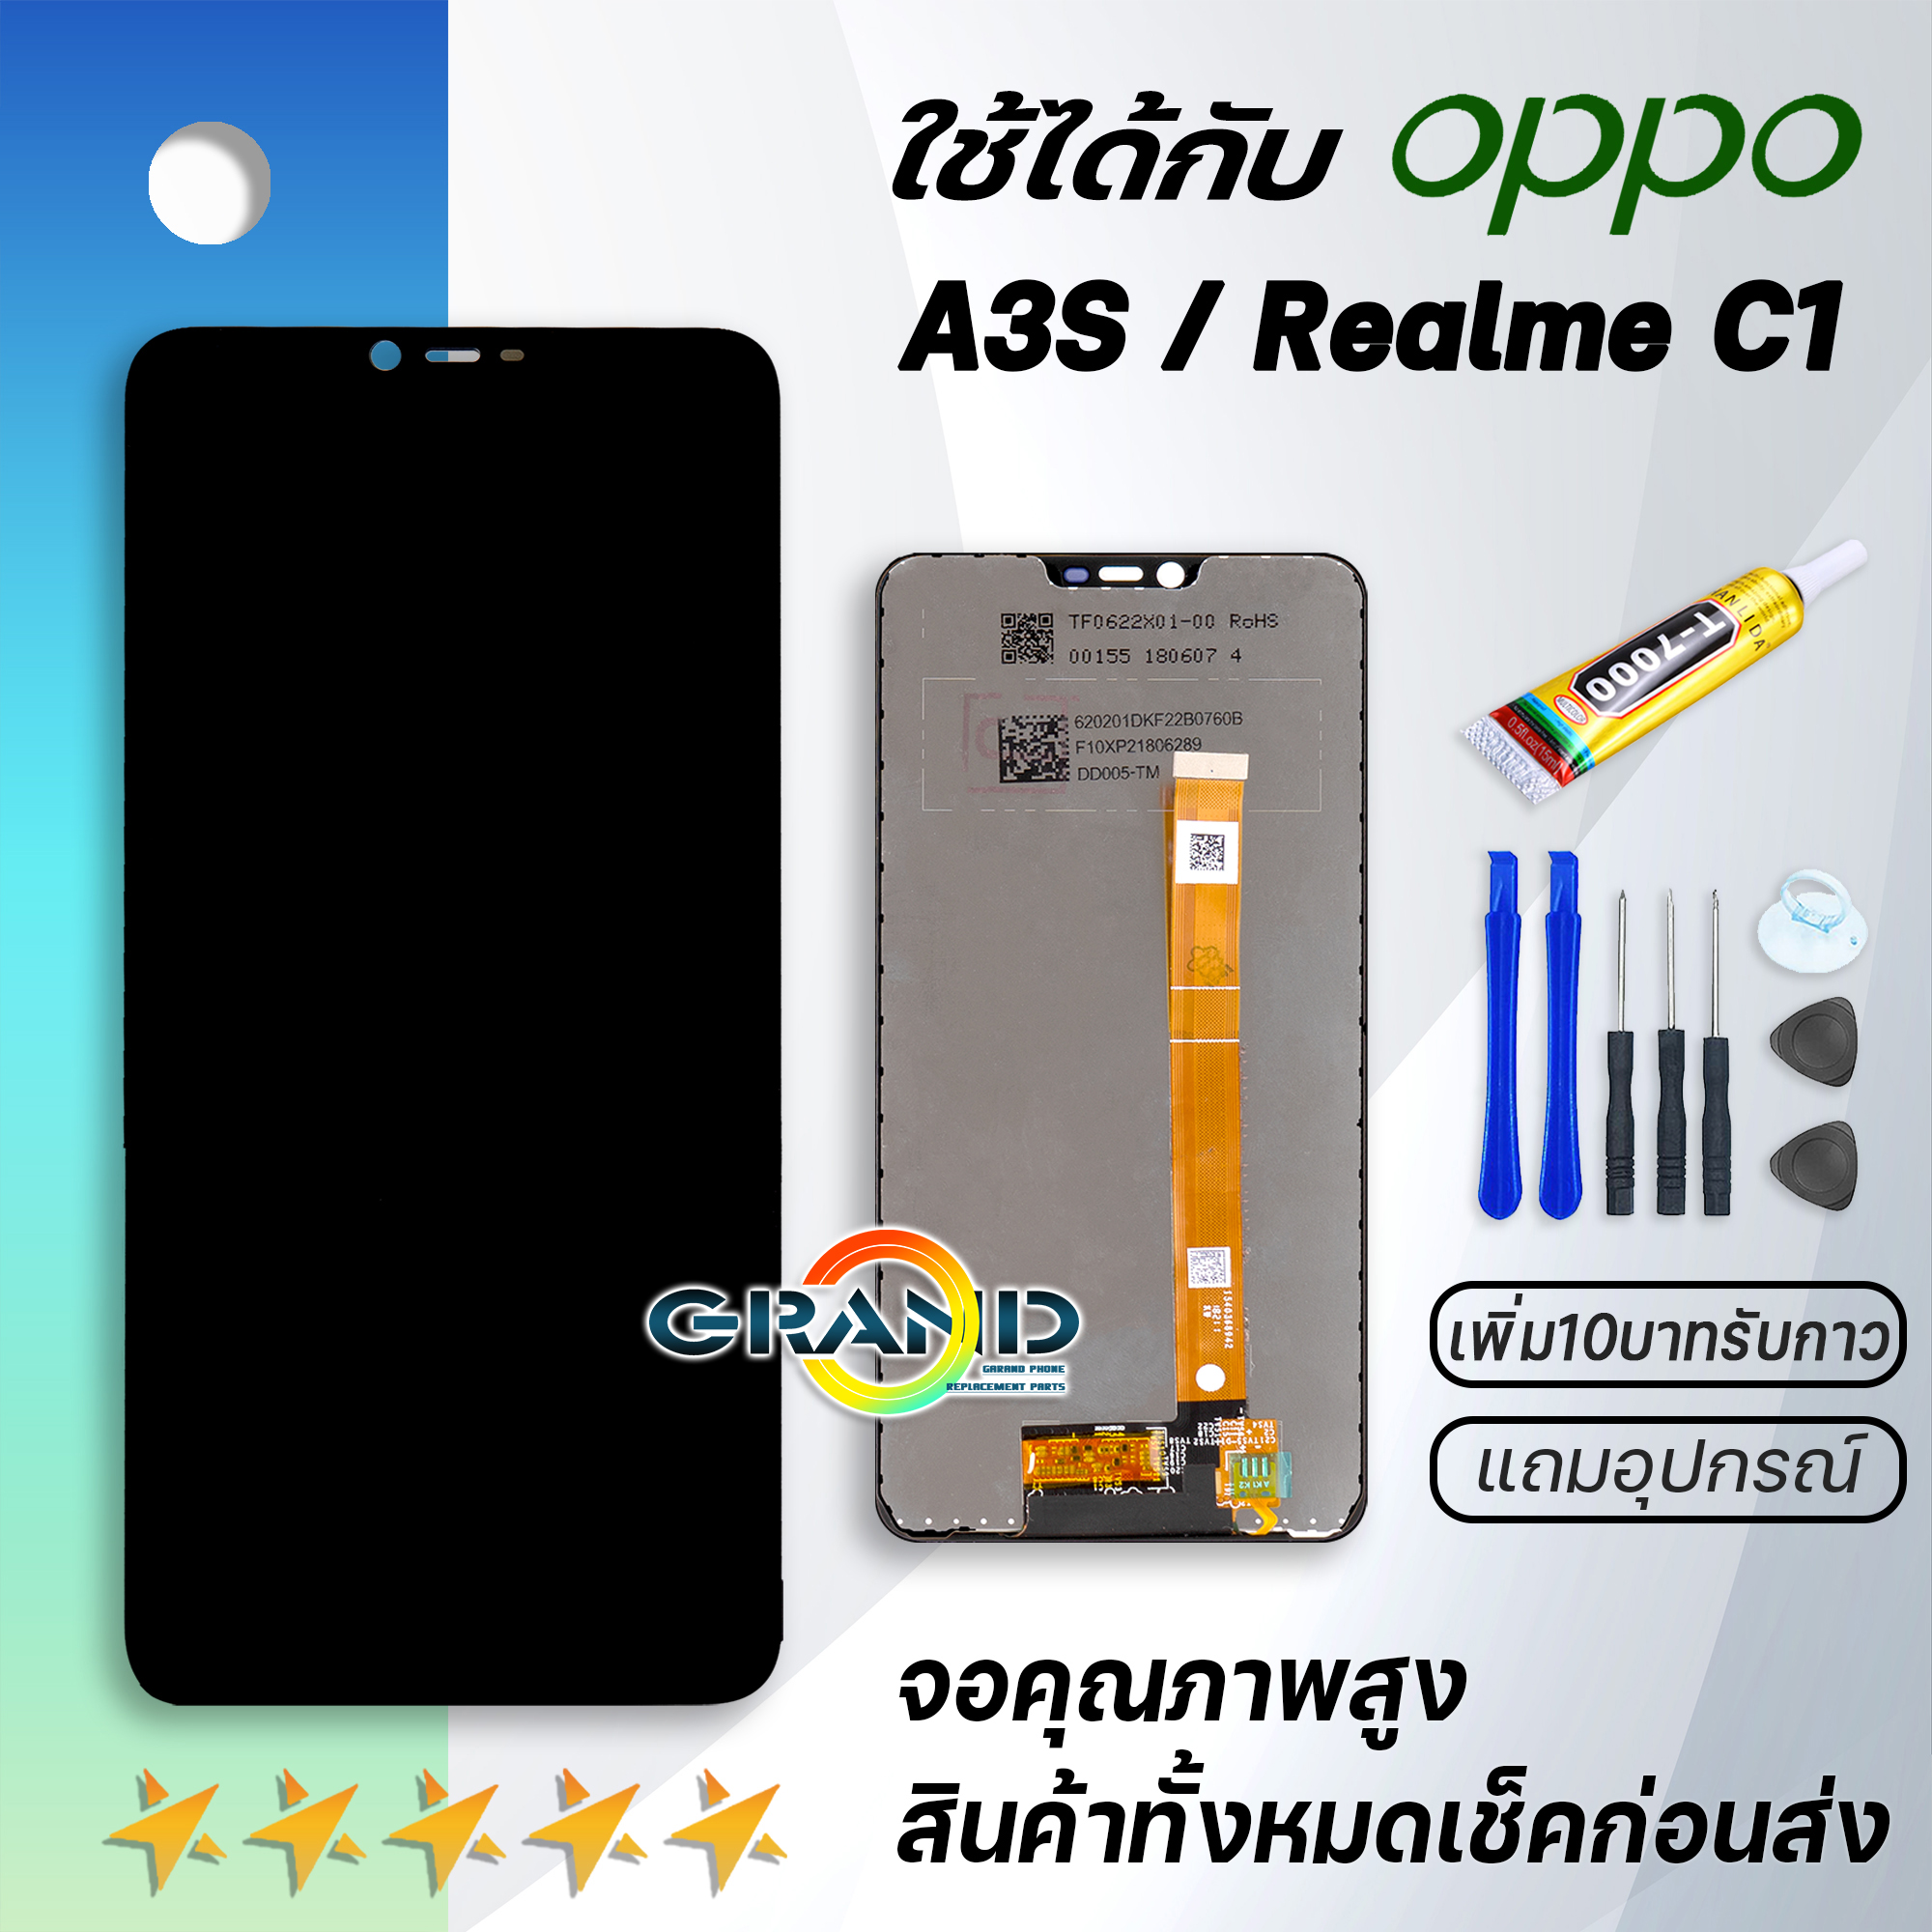 Grand Phone หน้าจอ A3S/realme C1 หน้าจอ LCD พร้อมทัชสกรีน - oppo A3S LCD Screen Display Touch Panel For OPPO A3s CPH1803/1853 งานแท้ icแท้